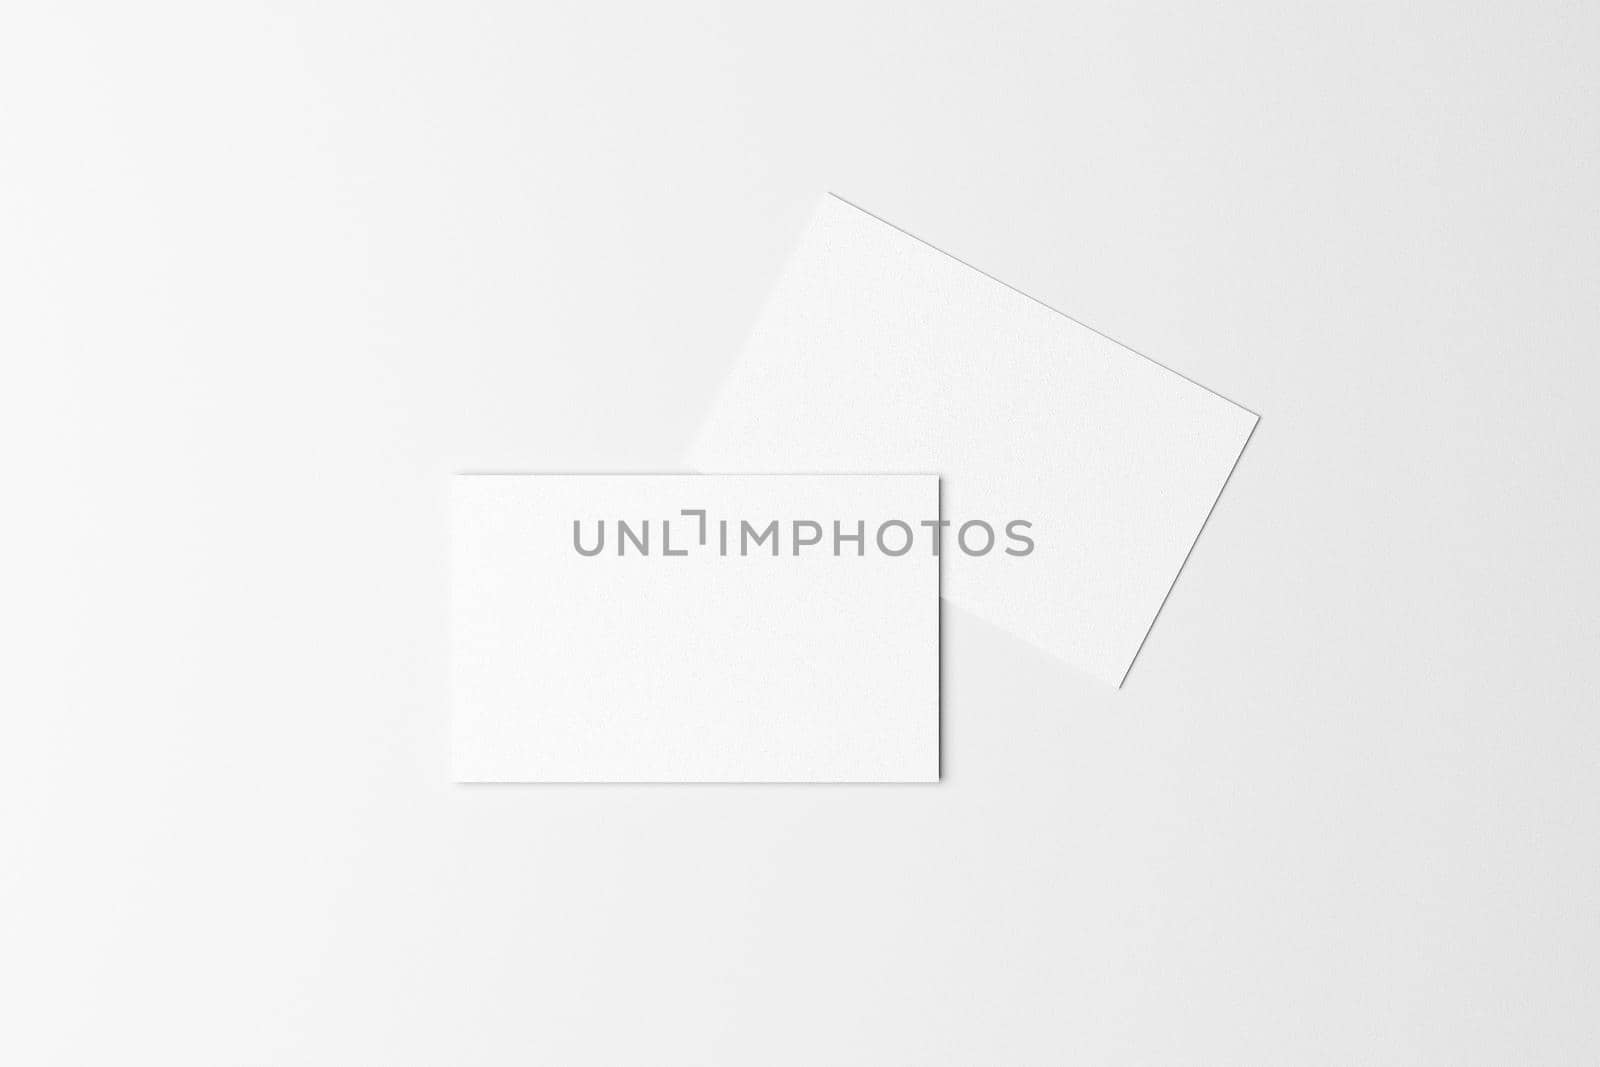 top view of white business card on white background for mockup. 3d illustration